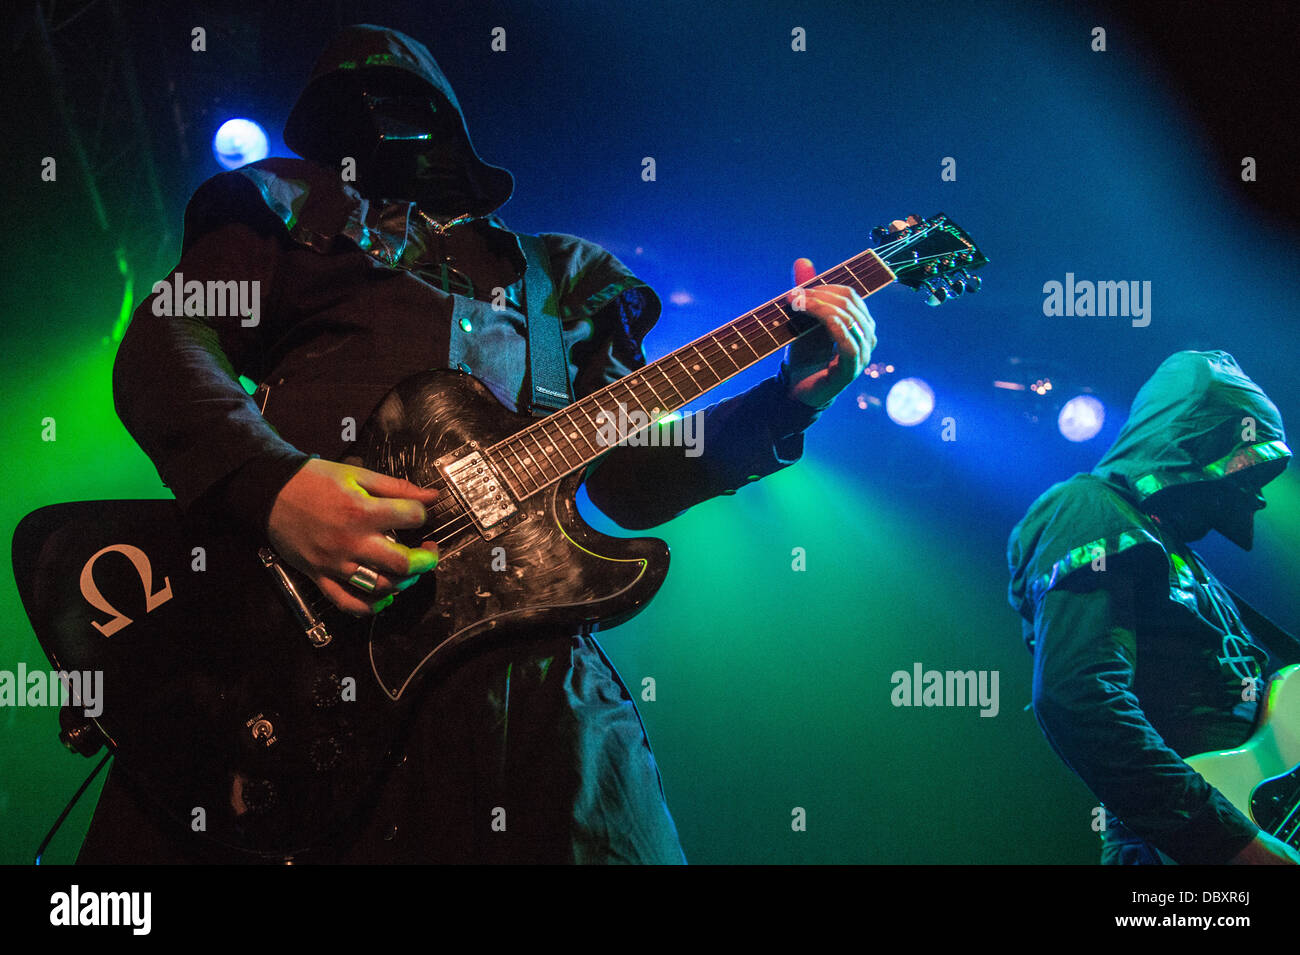 Heavy metal band Ghost performing at Double Door in Chicago, IL in 2013 Stock Photo